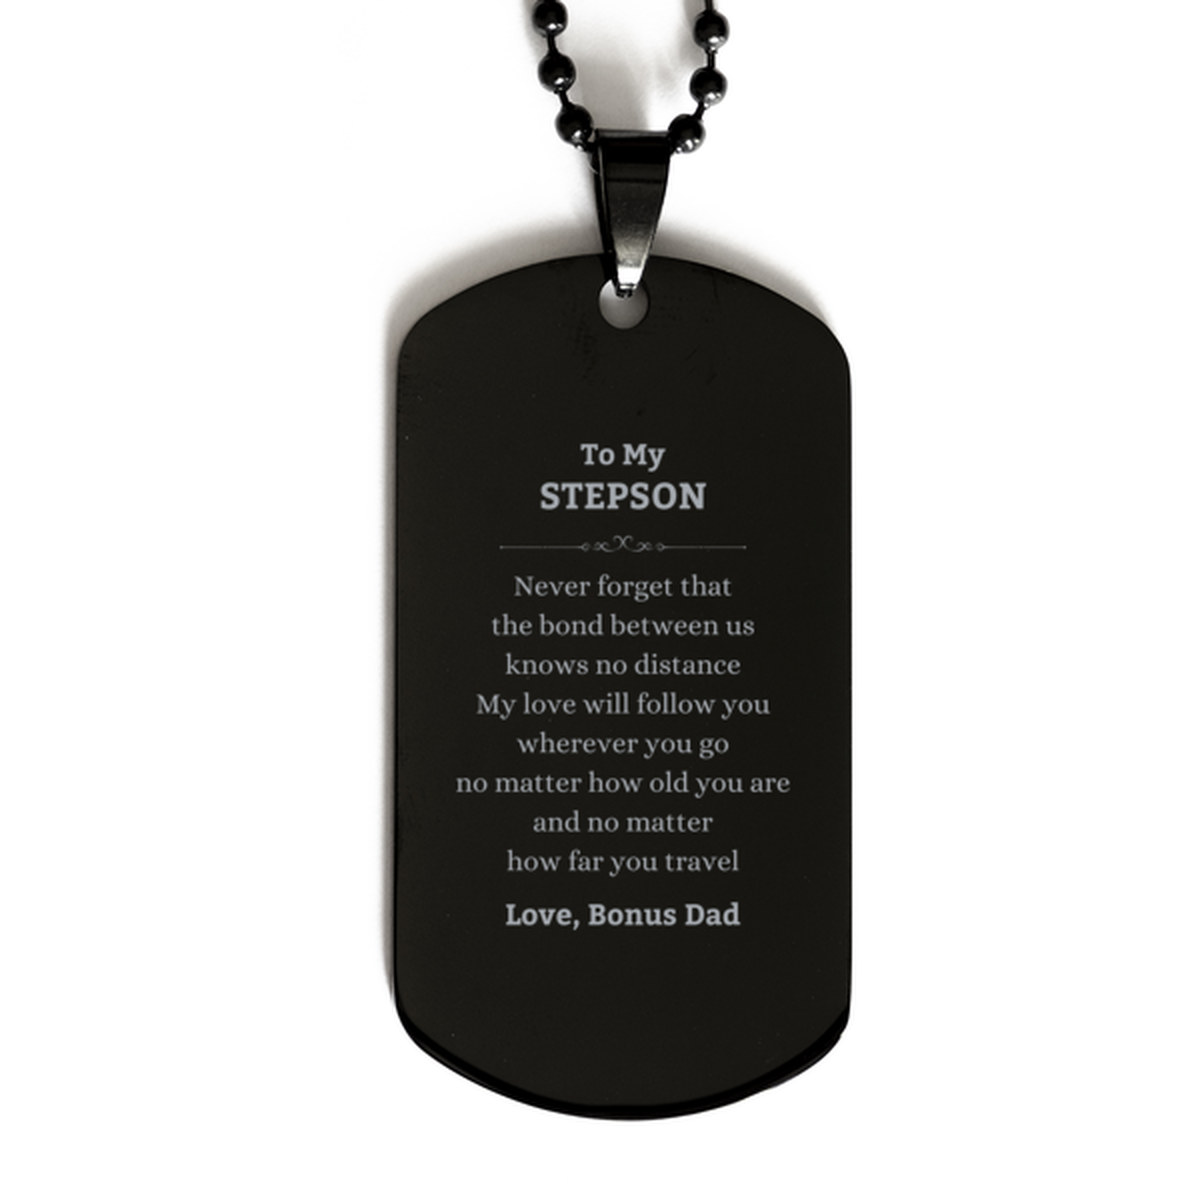 Stepson Birthday Gifts from Bonus Dad, Adjustable Black Dog Tag for Stepson Christmas Graduation Unique Gifts Stepson Never forget that the bond between us knows no distance. Love, Bonus Dad